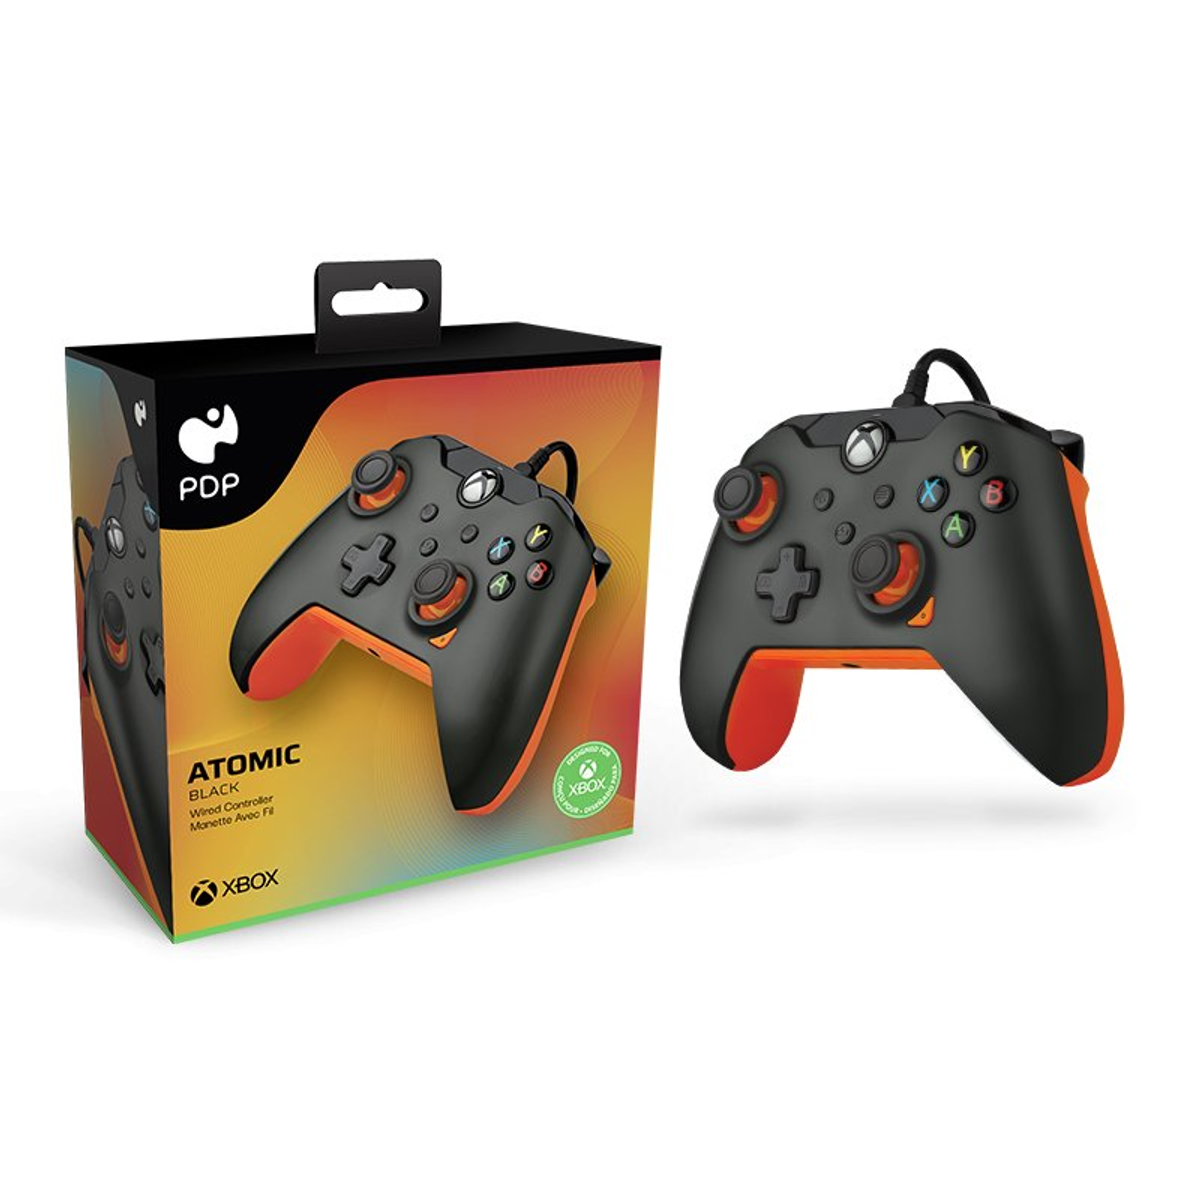 PDP 049-012-GO ATOMIC CONT. BLACK Atomic WIRED Controller Black